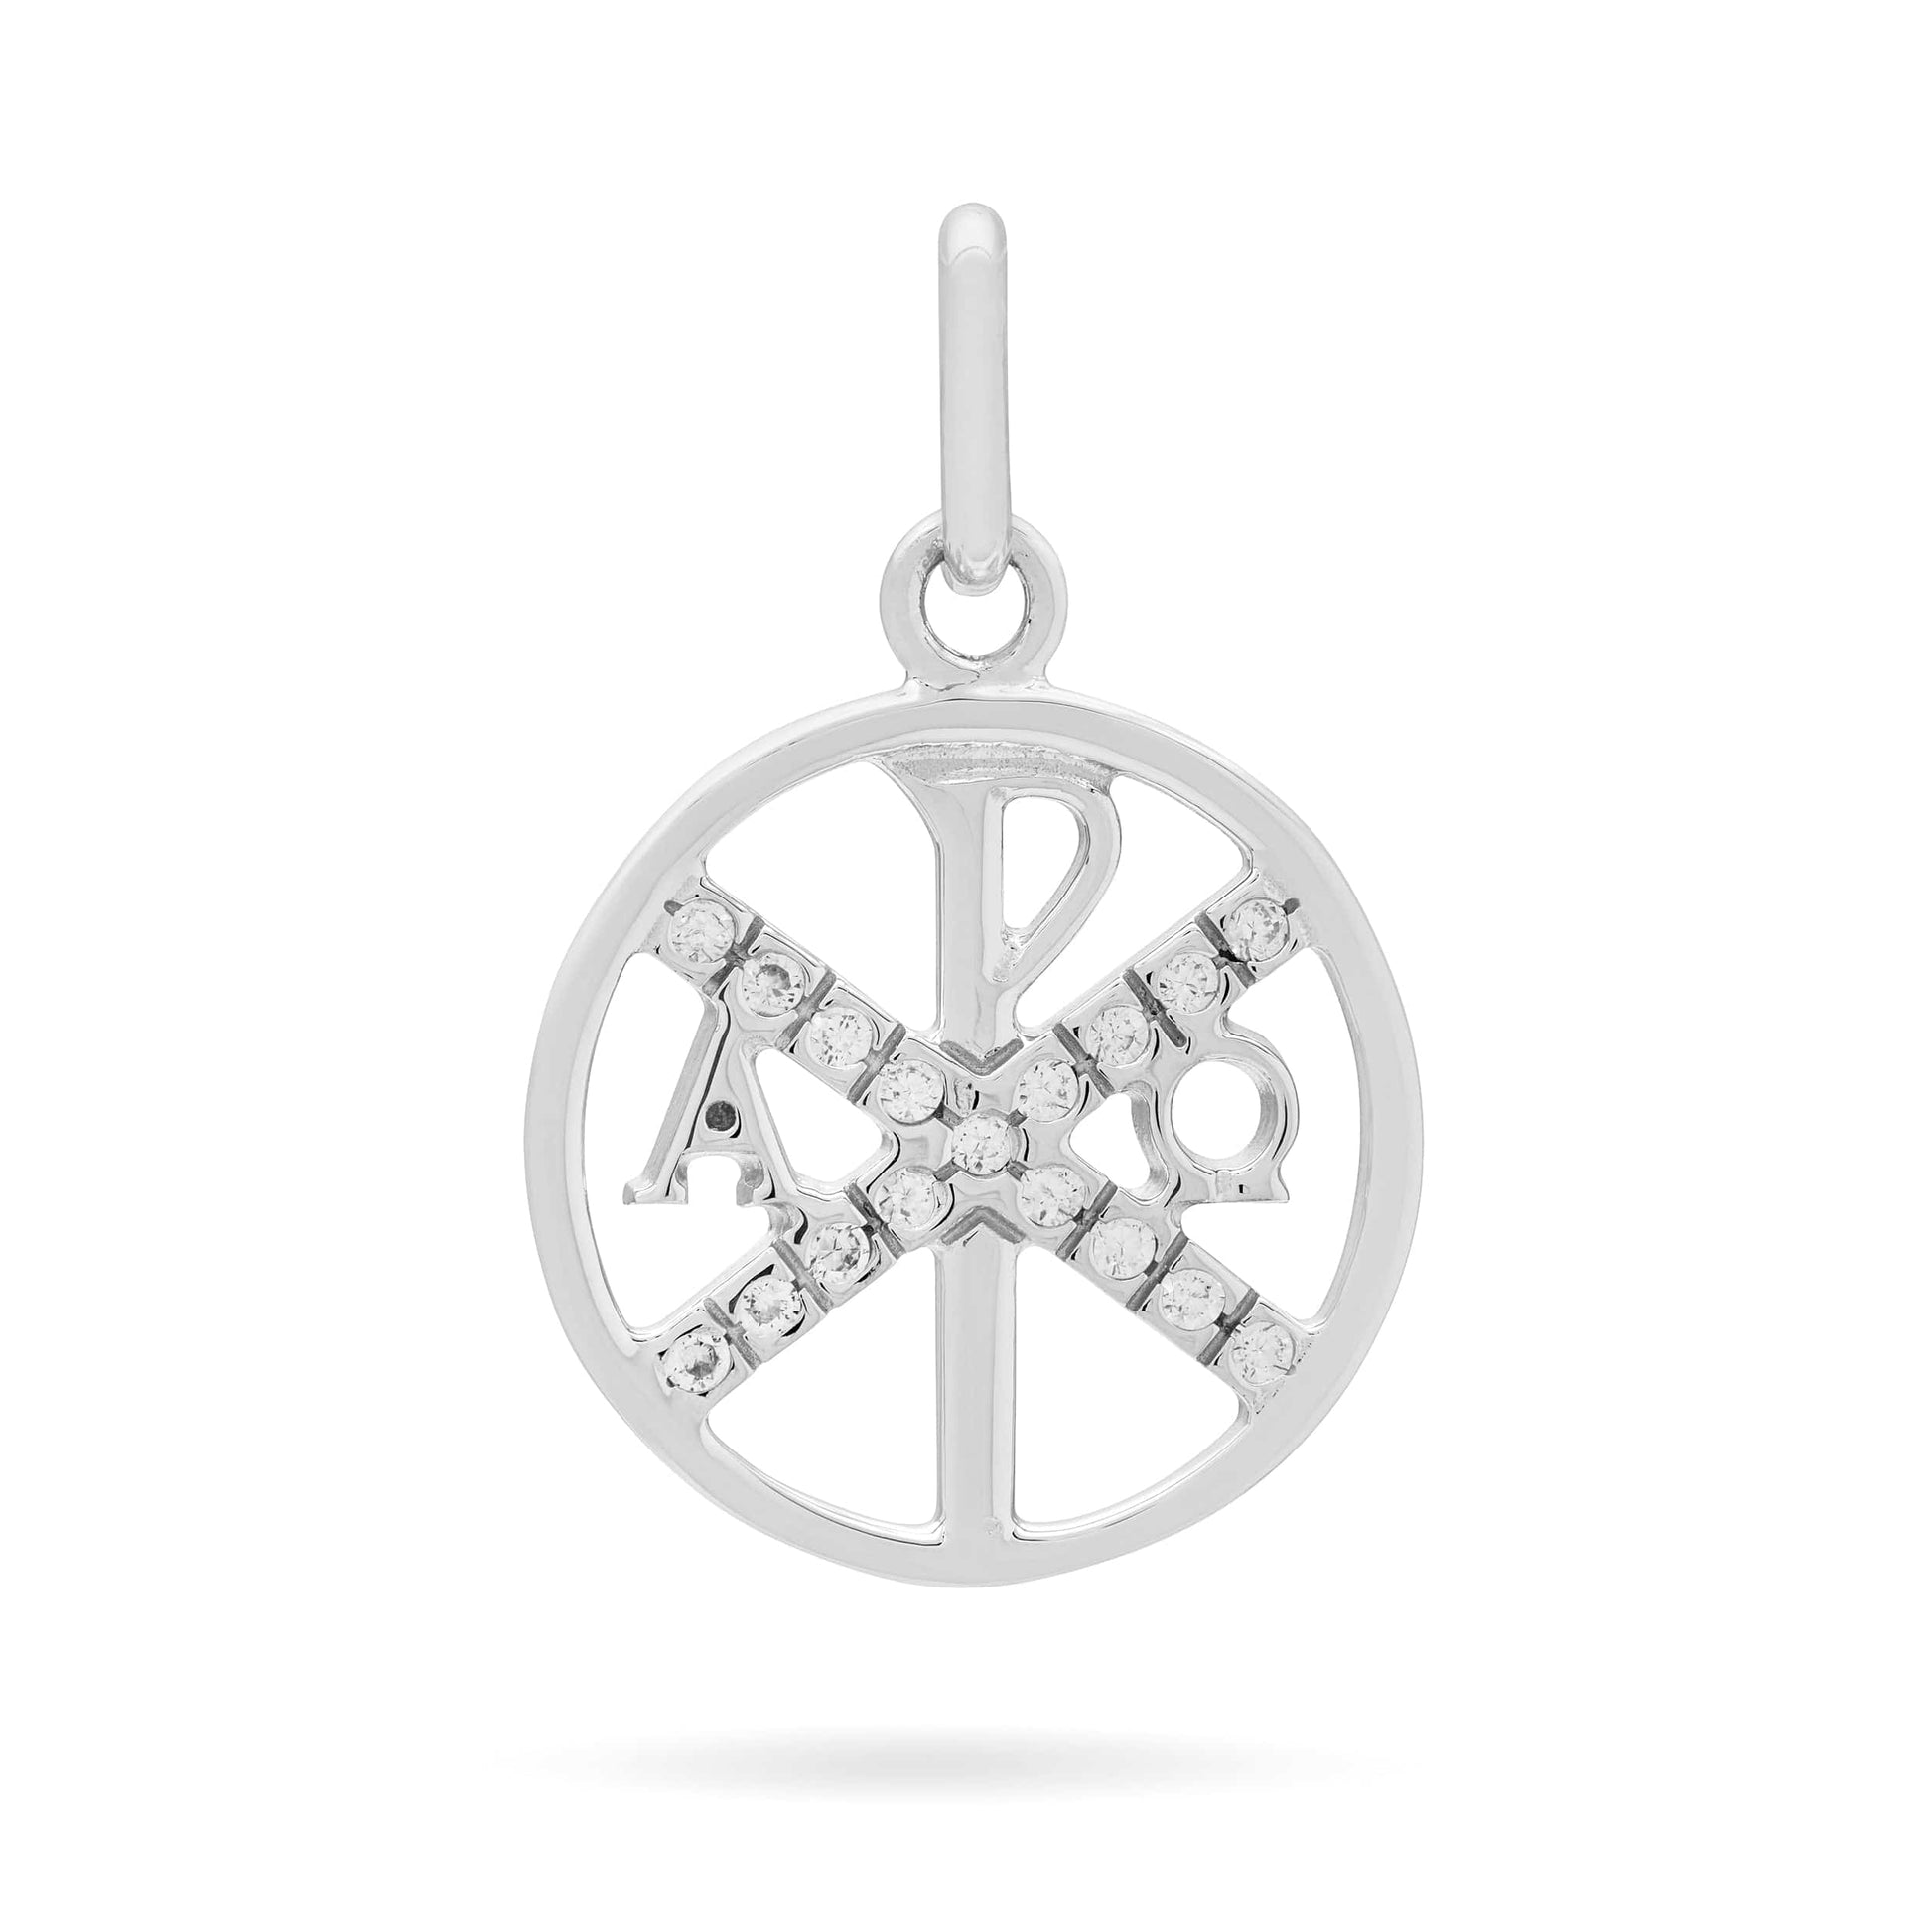 MONDO CATTOLICO Medal 16 mm (0.63 in) Sterling Silver Peace Cross Medal with Zirconia